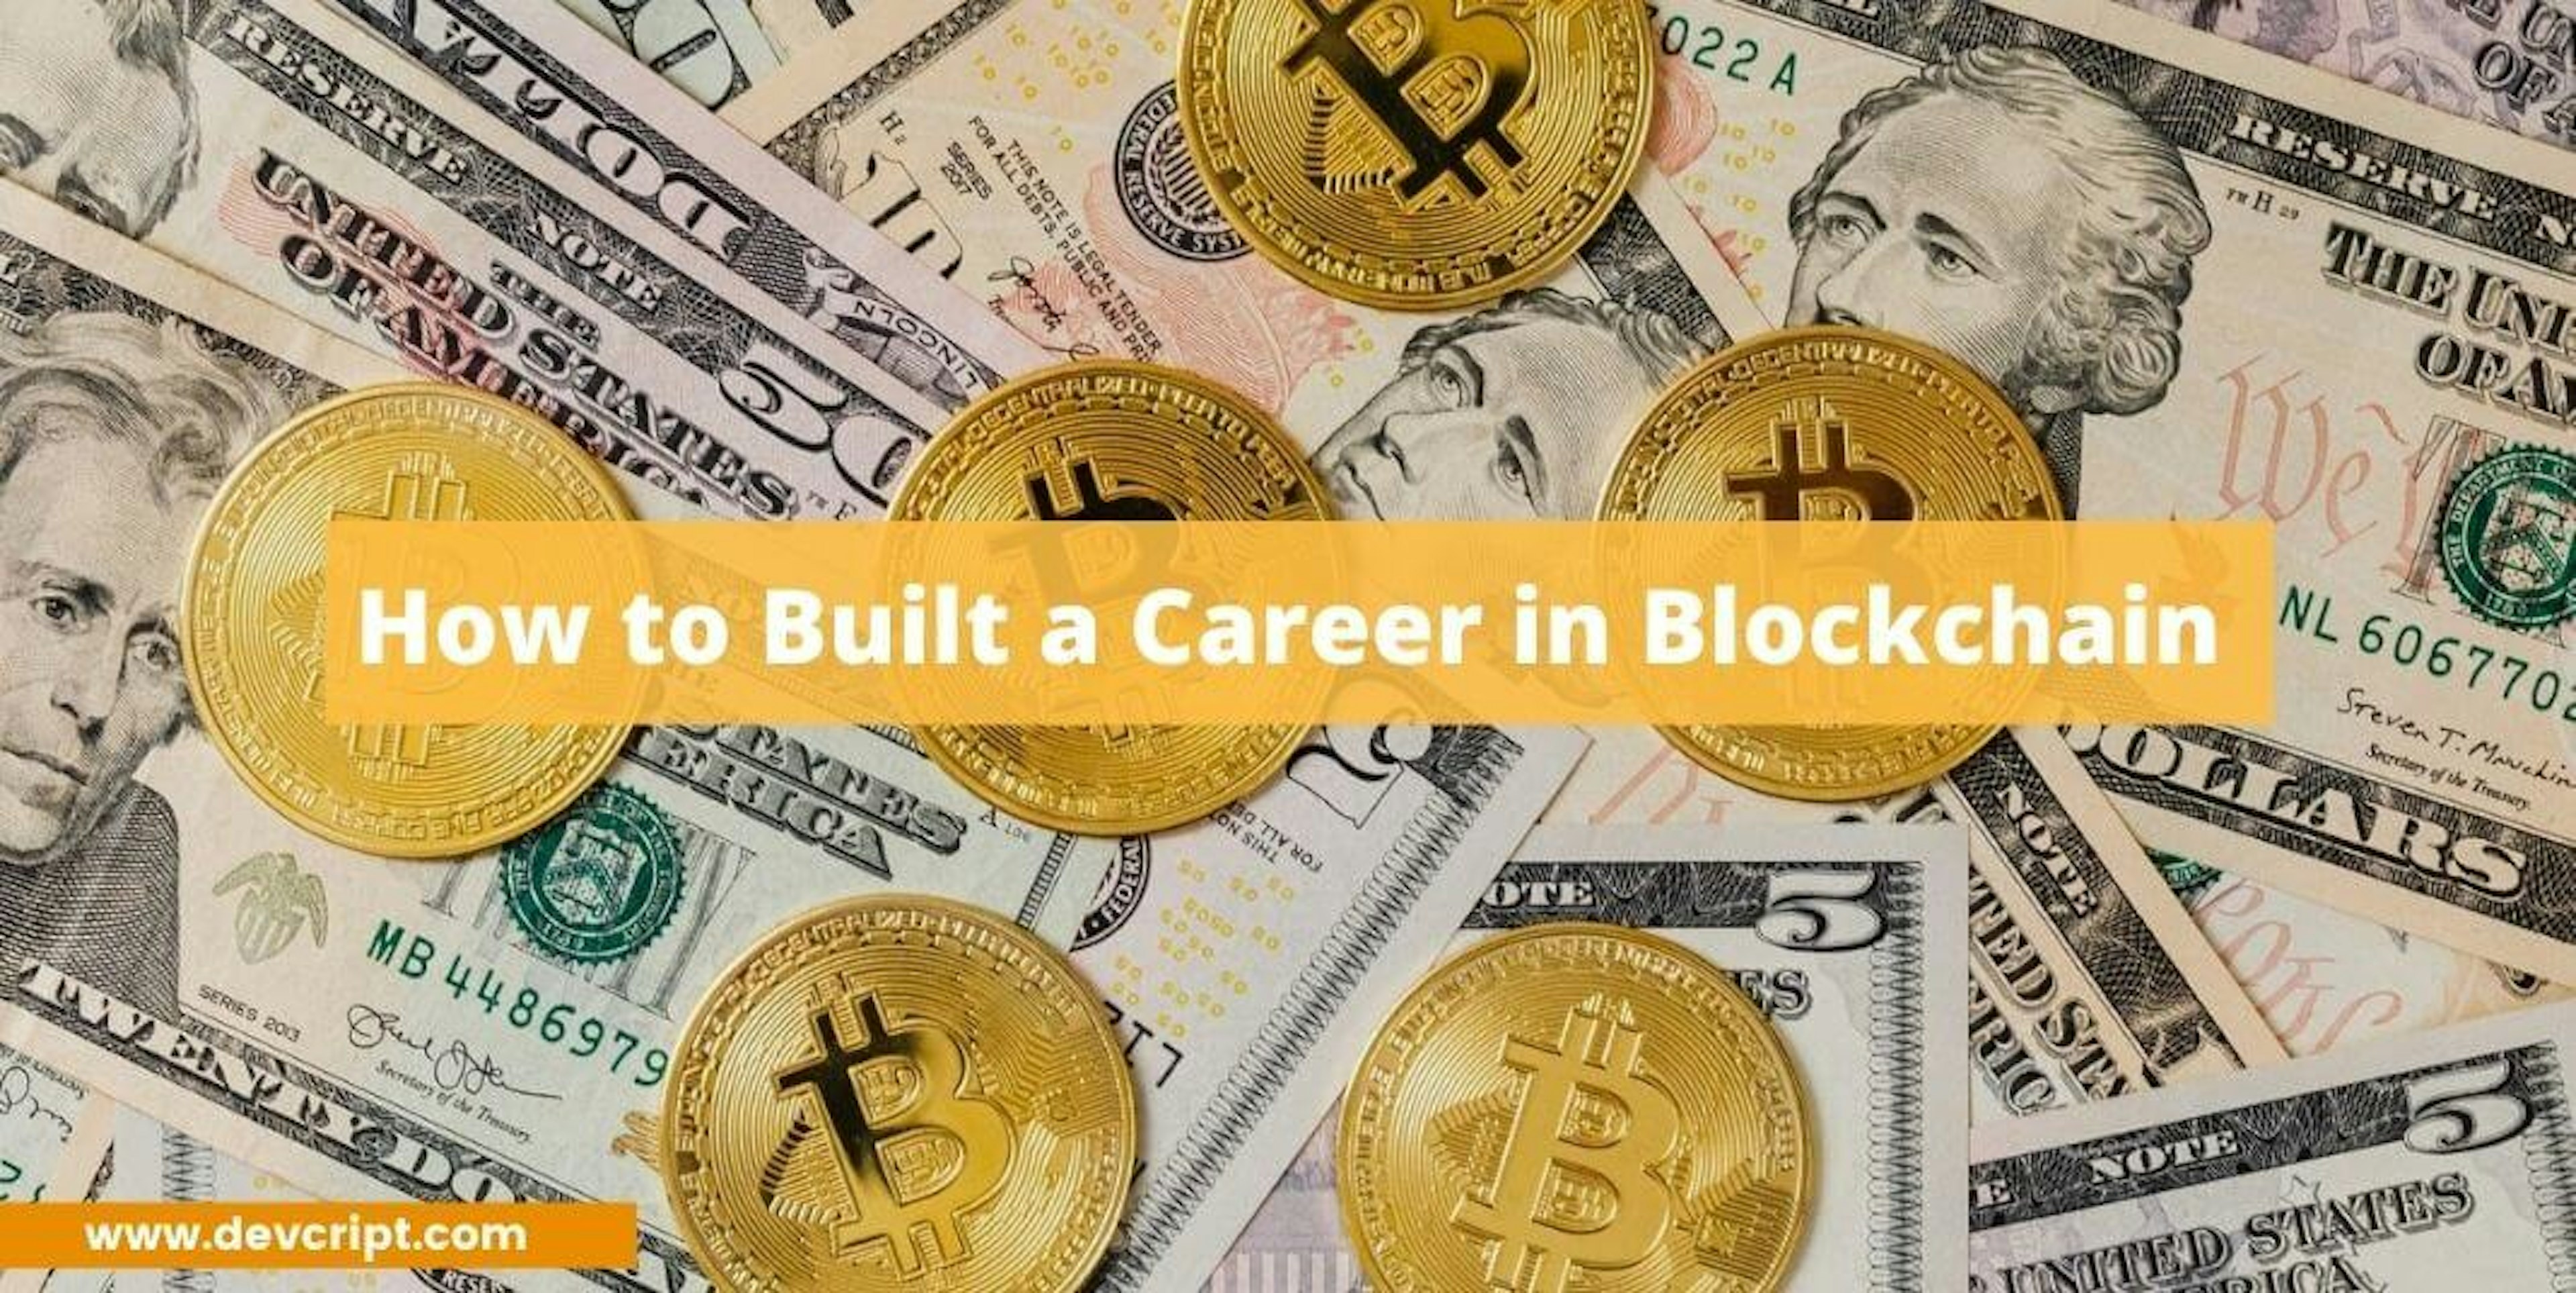 How to Built a Career in Blockchain